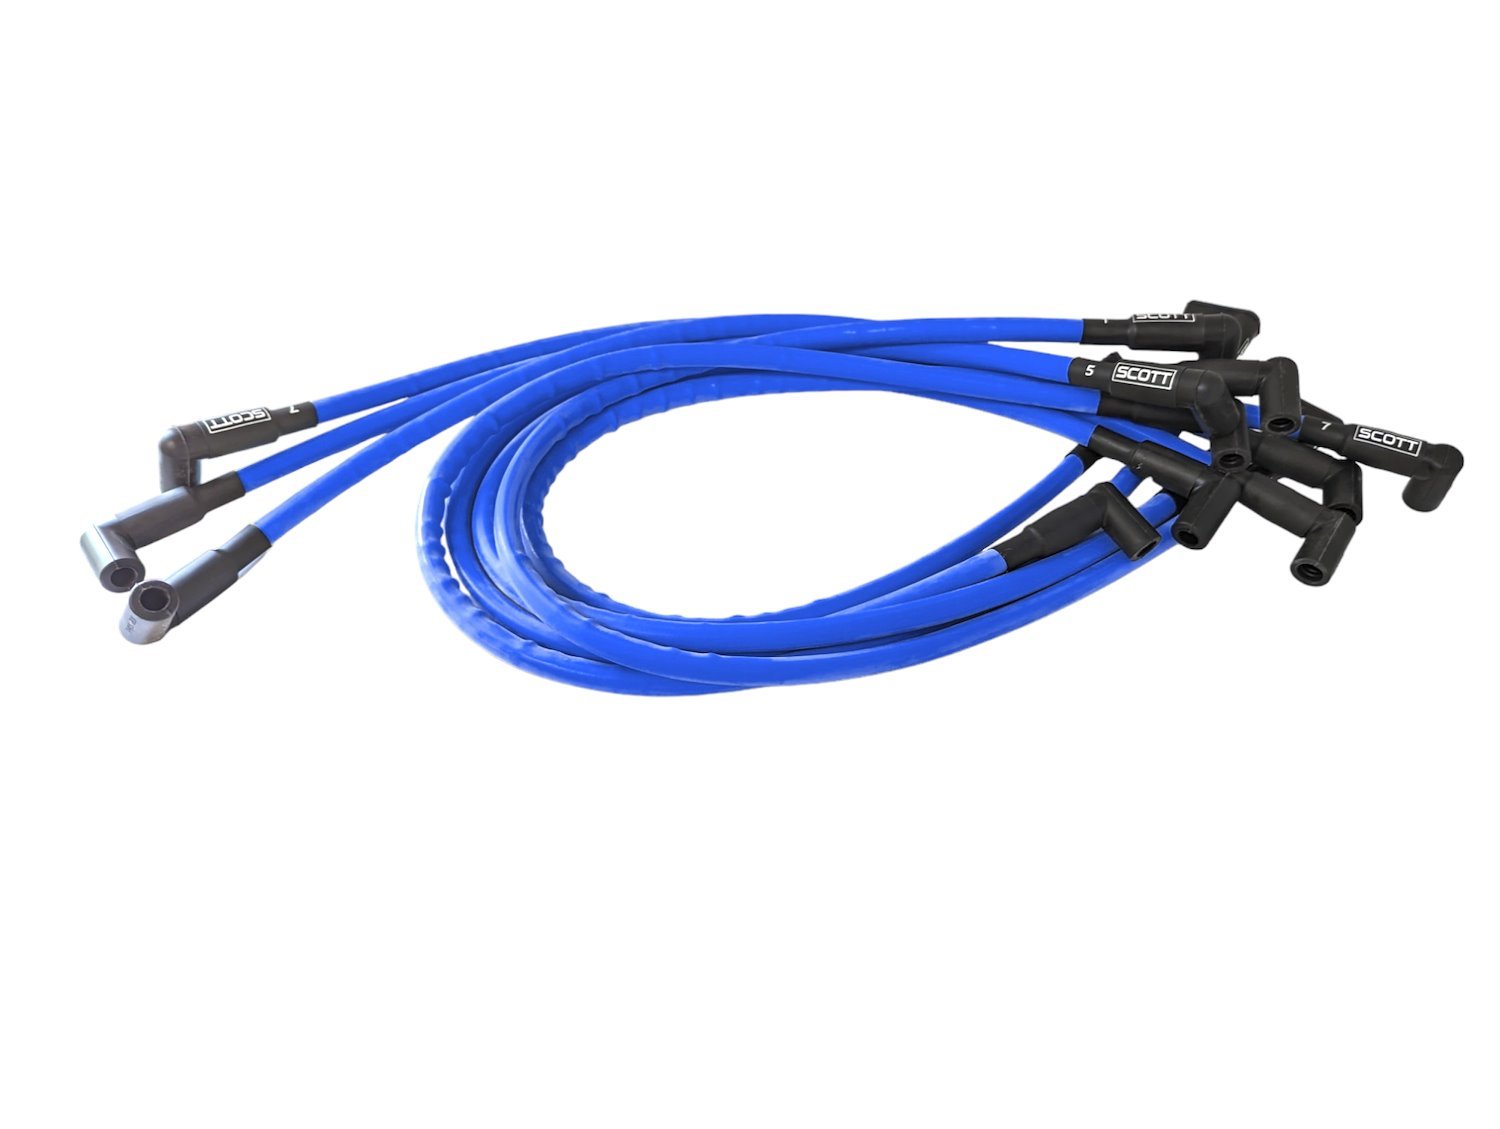 SPW300-CH-402-4 Super Mag Fiberglass-Oversleeved Spark Plug Wire Set for Small Block Chevy, Over Valve Cover [Blue]